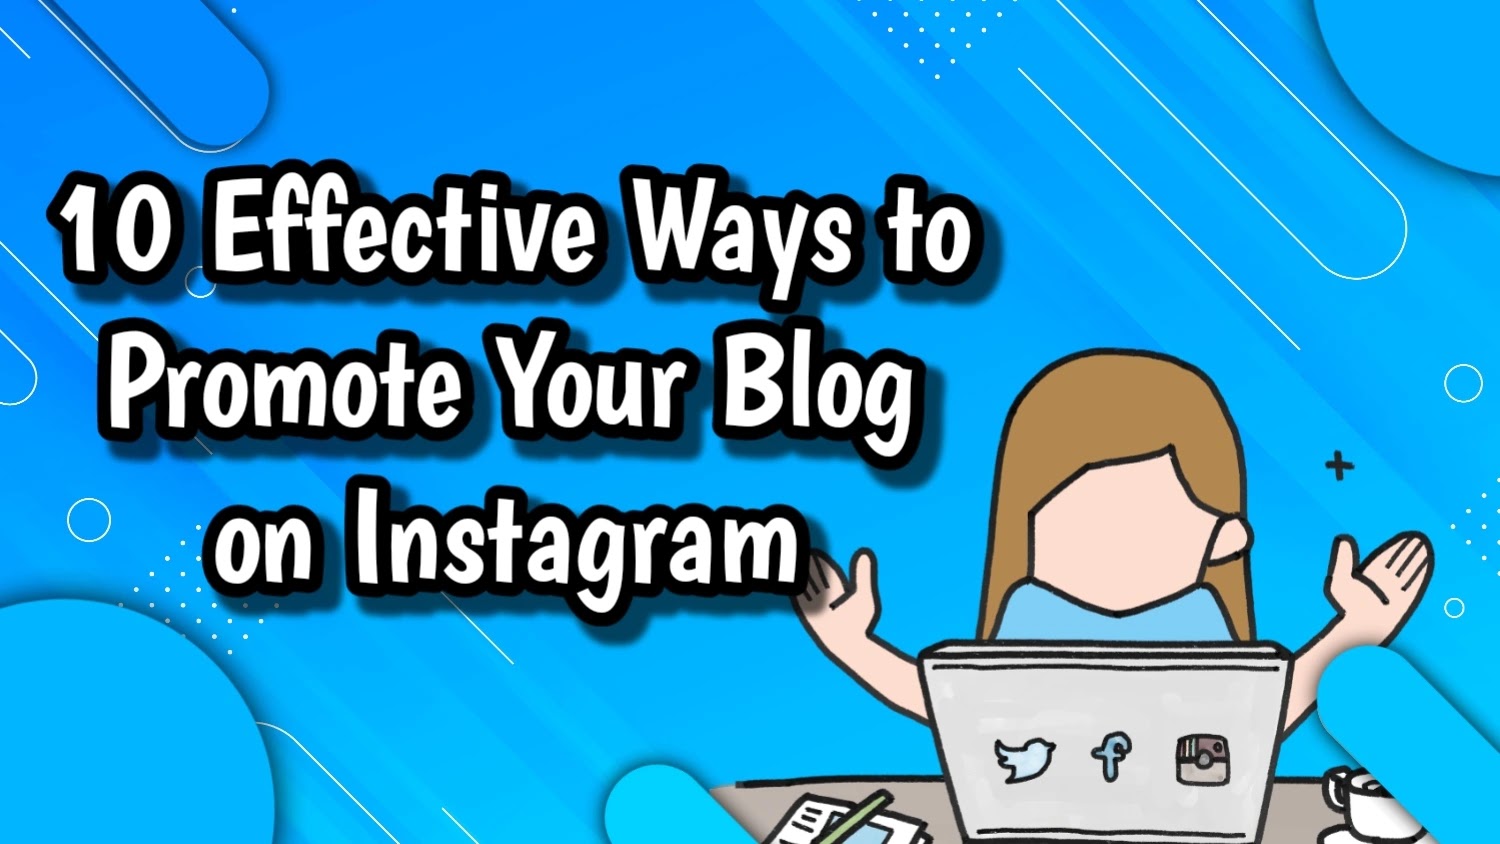 10 Effective Ways to Promote Your Blog on Instagram